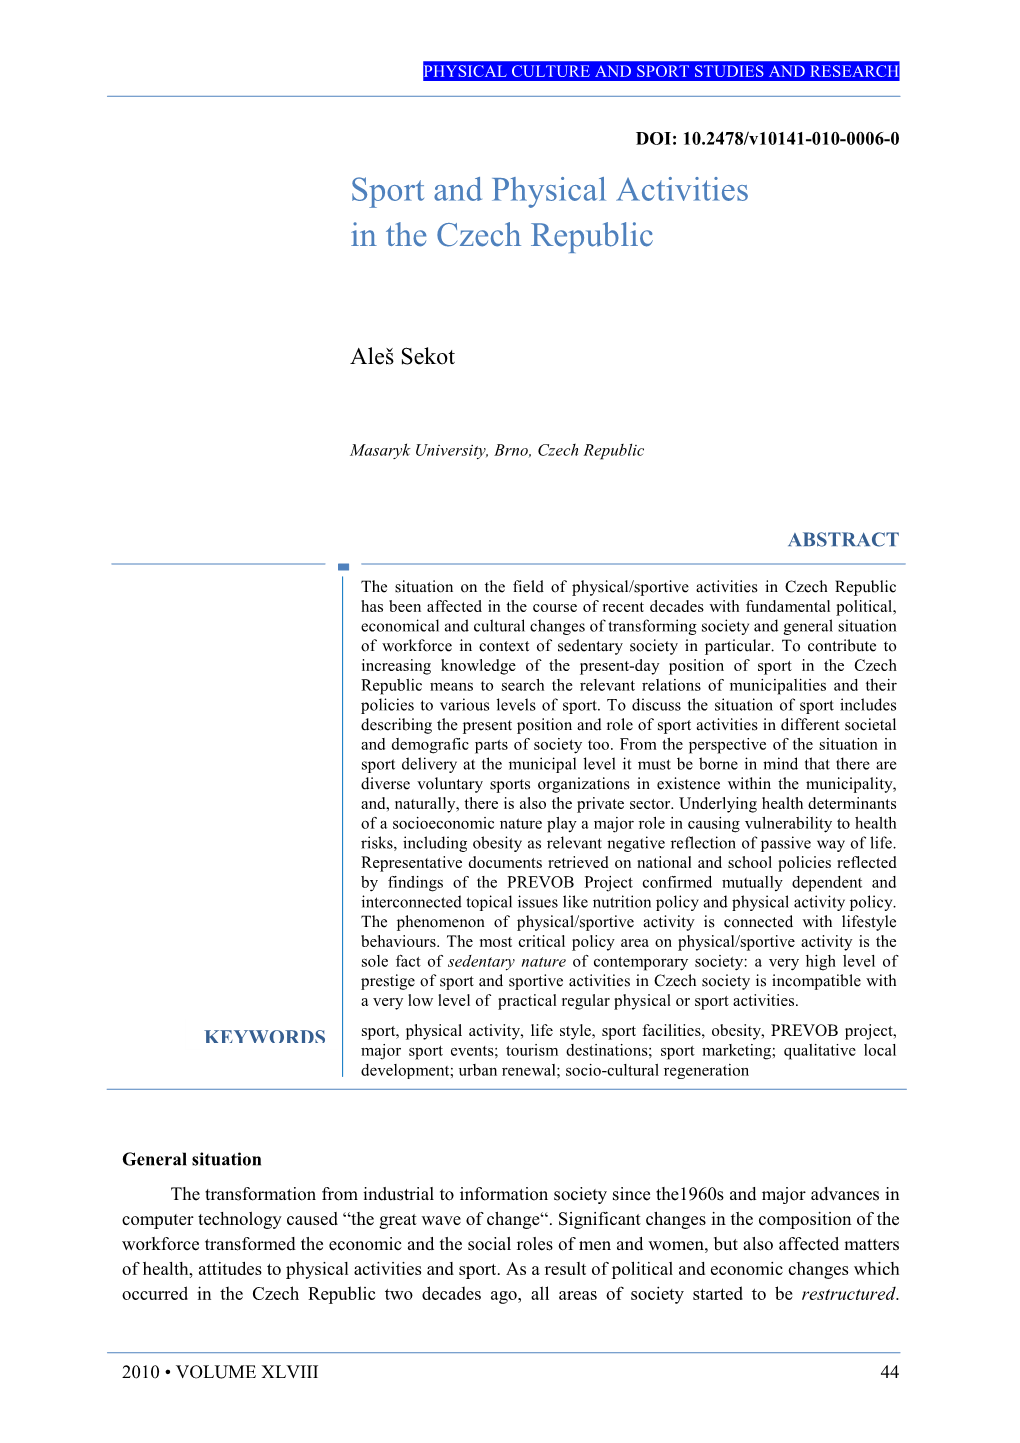 Sport and Physical Activities in the Czech Republic